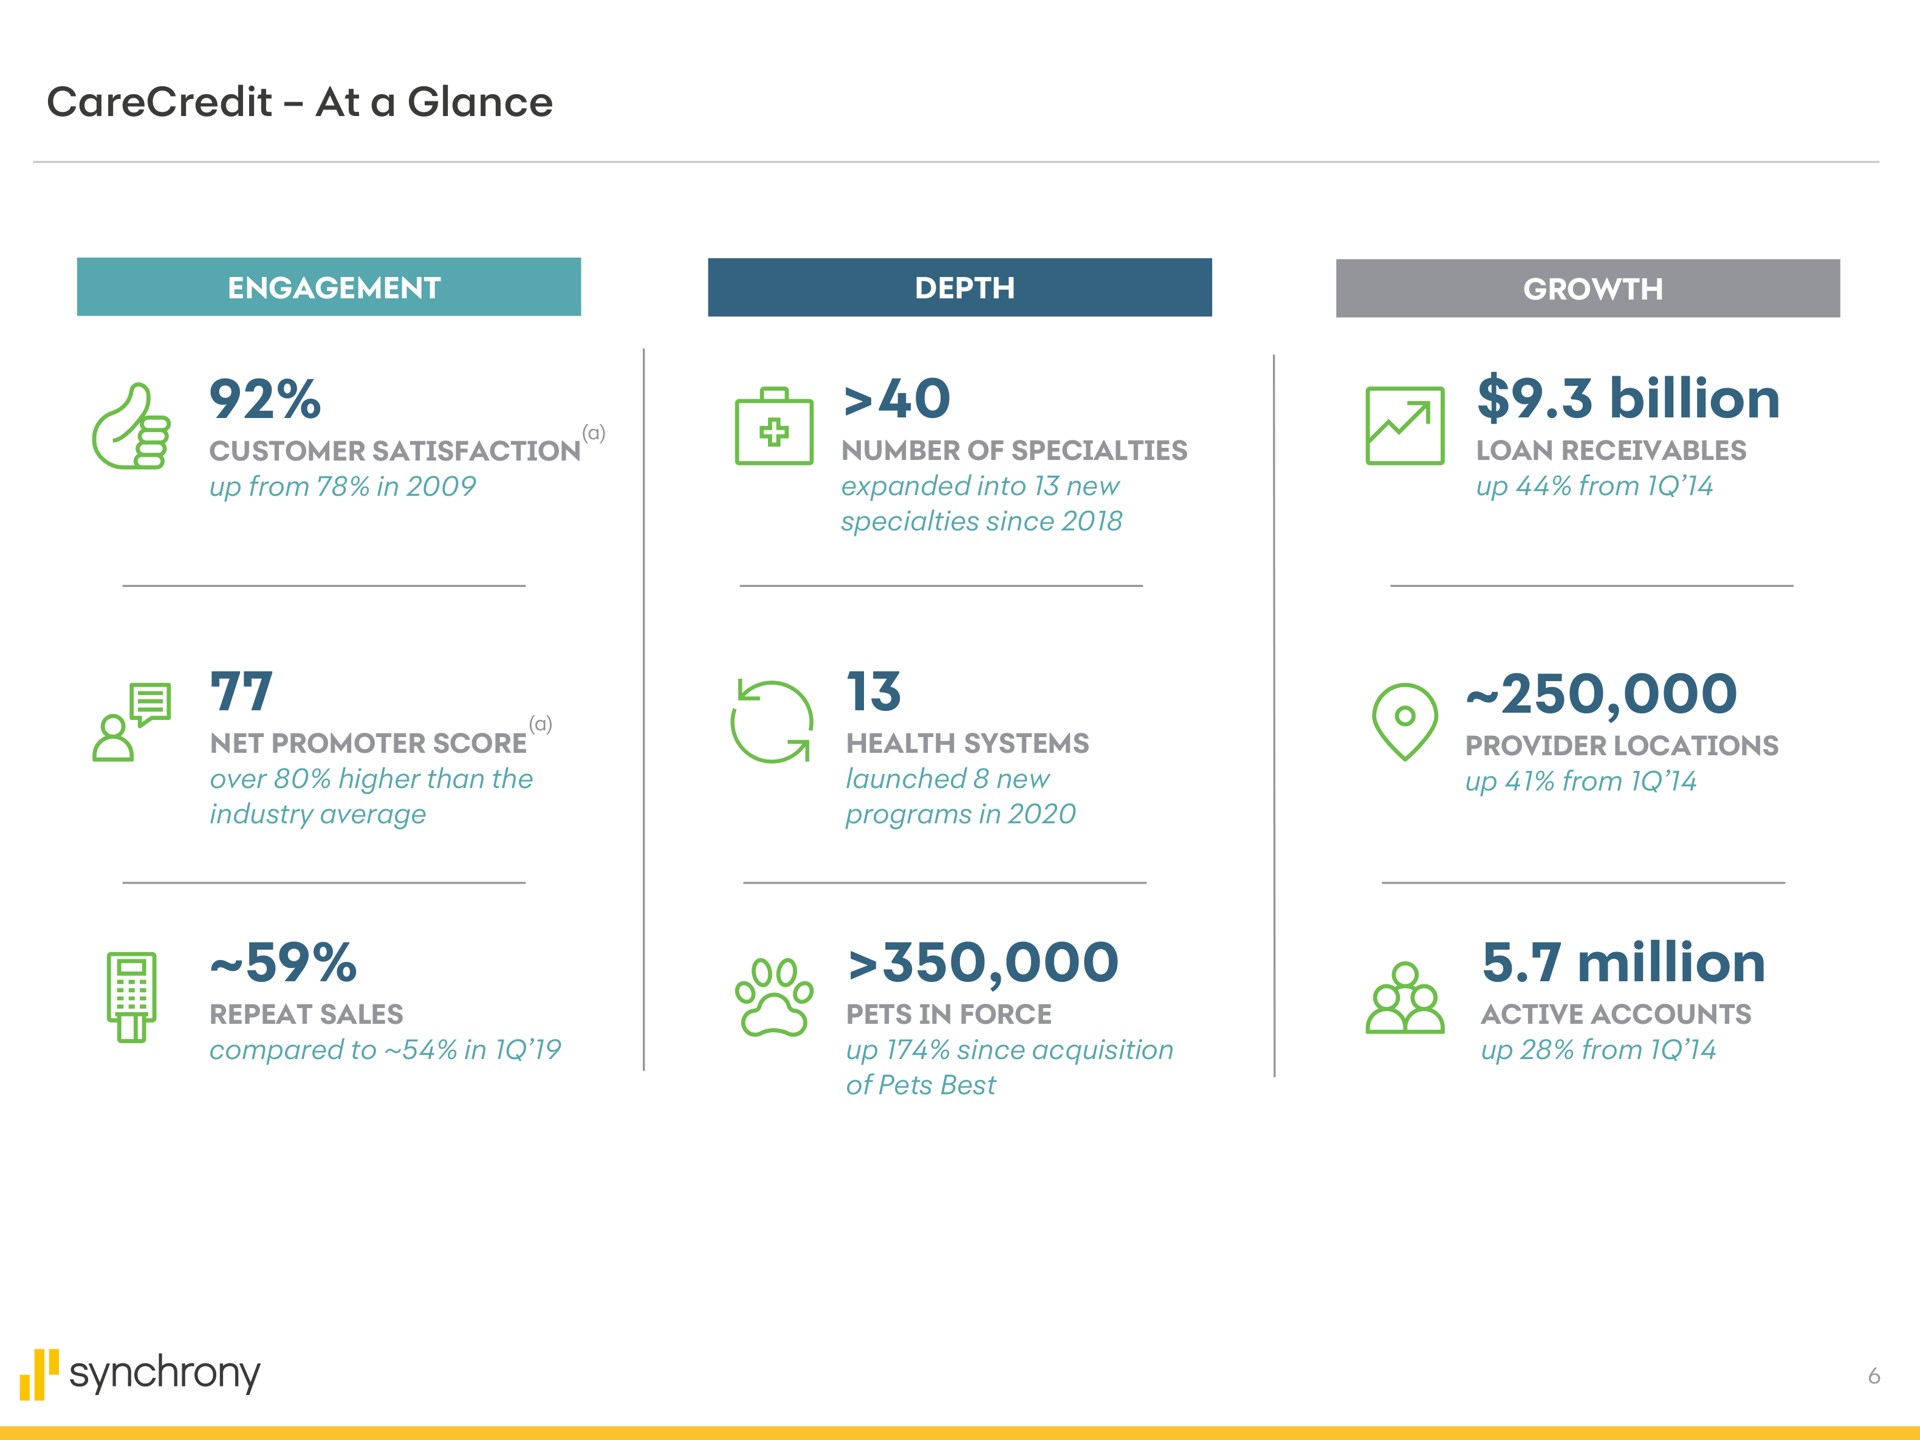 at a glance billion million repeat sales pets in force active accounts synchrony | Synchrony Financial